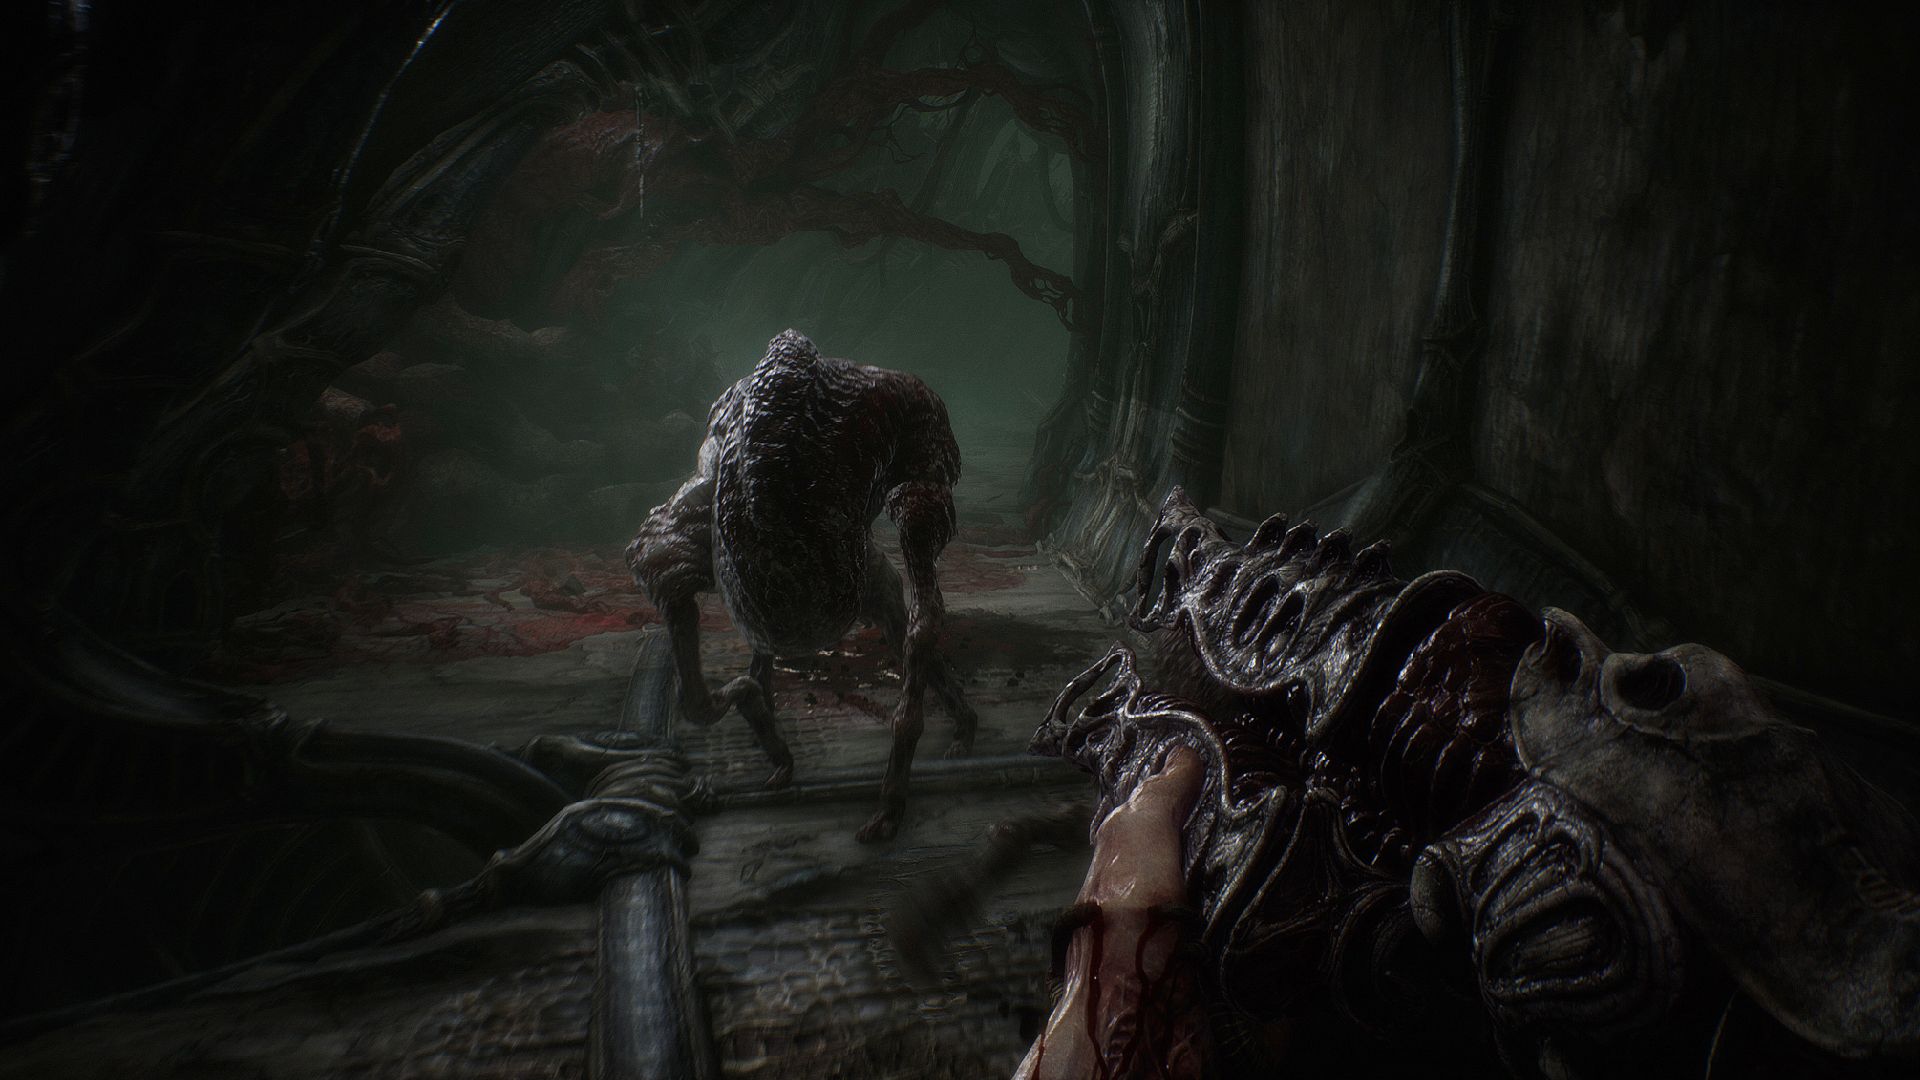 Scorn Game Pass: The player can be seen shooting a creature